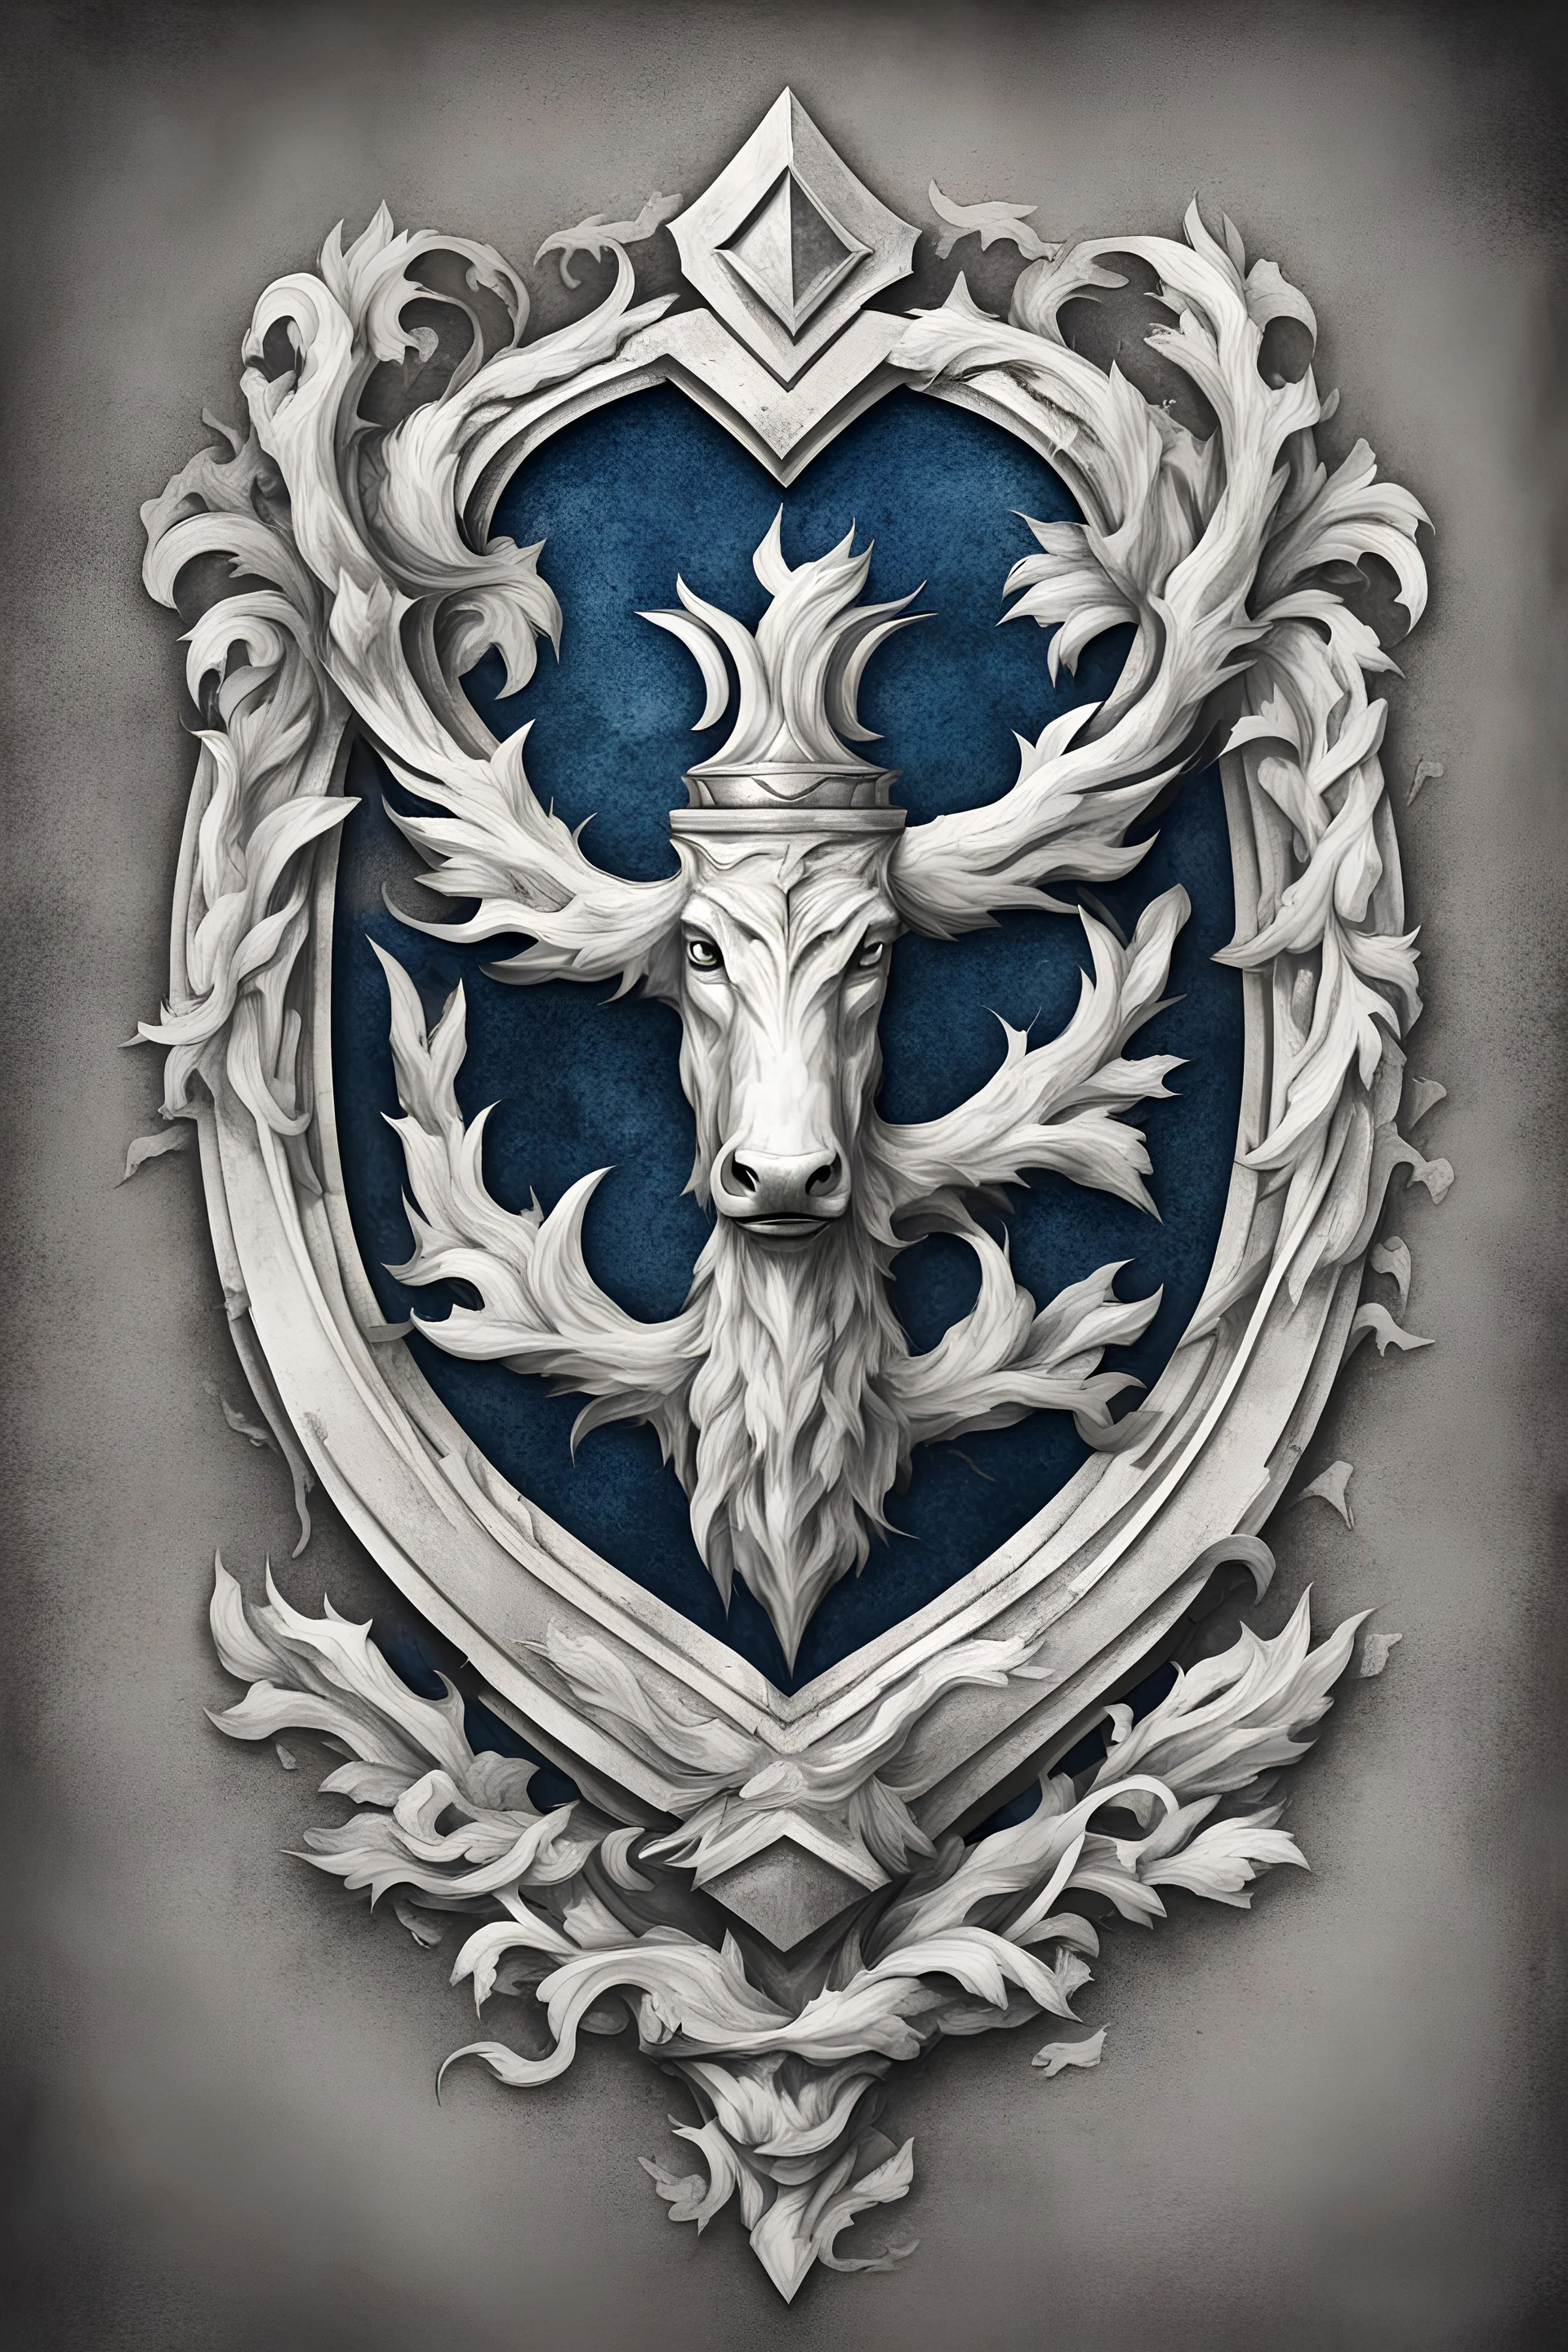 frost cowerd family crest with a huge Z in the center